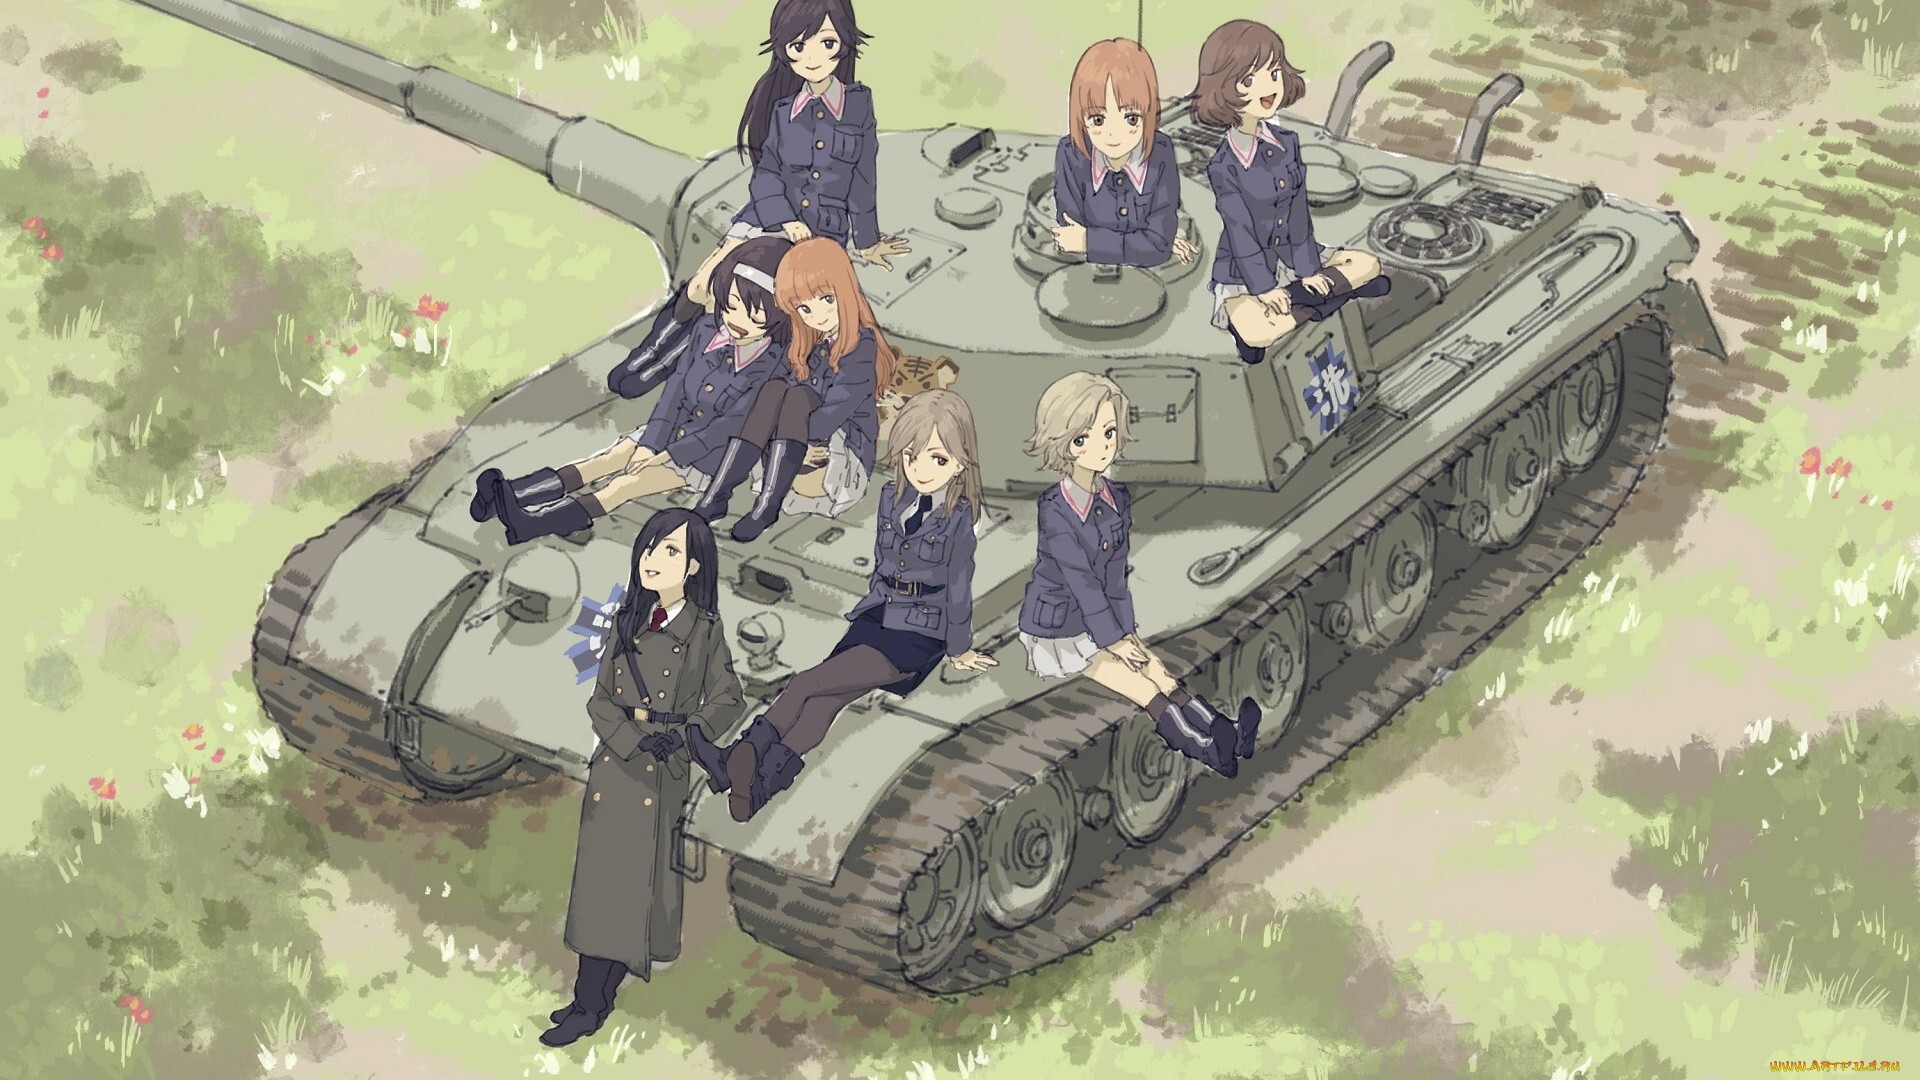 Girls und Panzer: Military anime characters, Powerful tank, A sport known as “Panzerfahren” or “Sensha-do”. 1920x1080 Full HD Background.